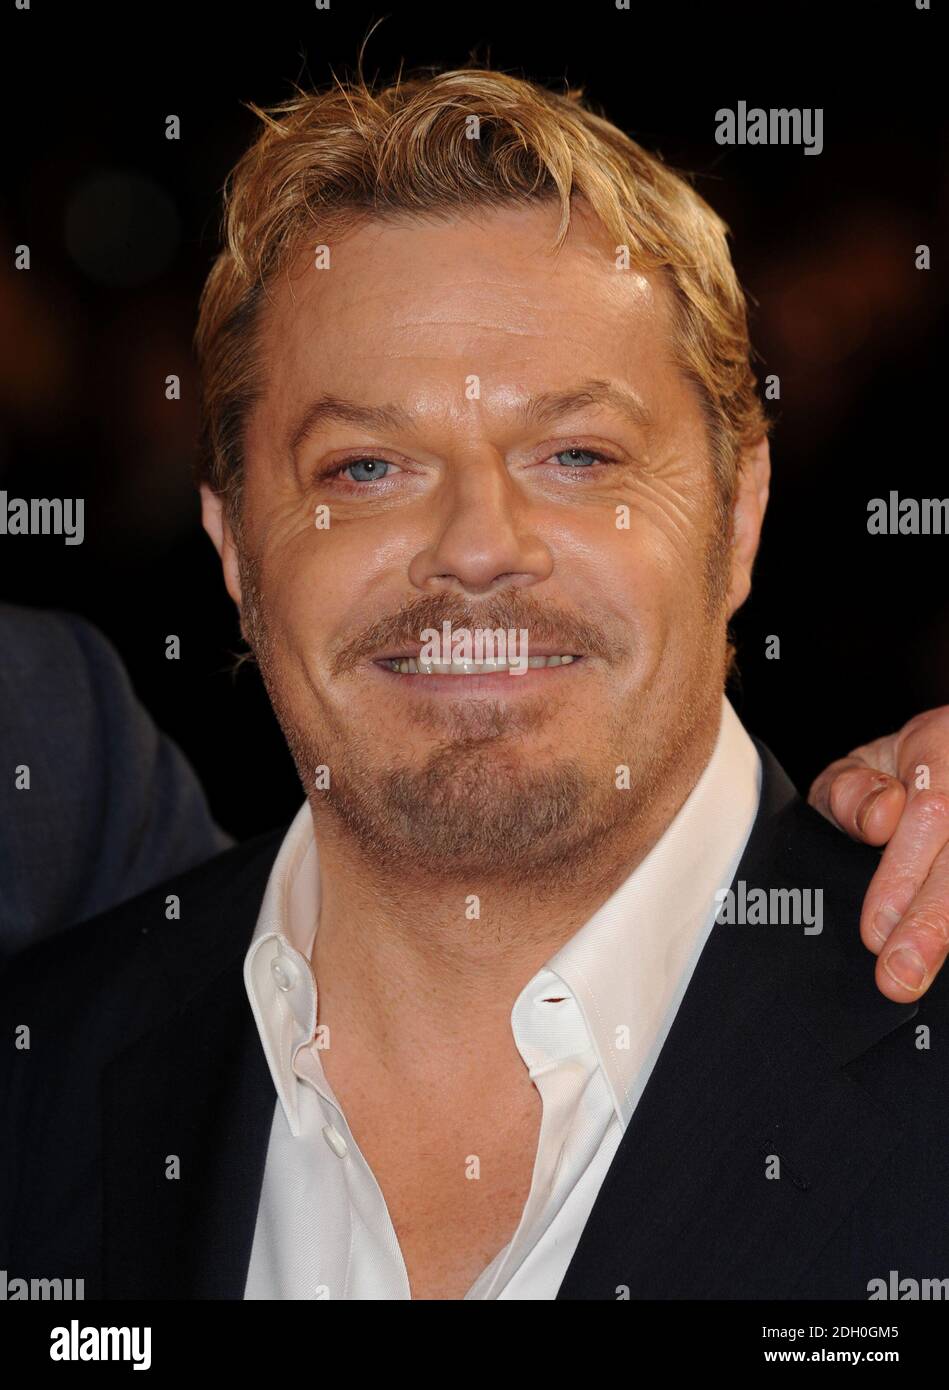 Eddie Izzard arriving for the UK premiere of 'Valkyrie' held at the ...